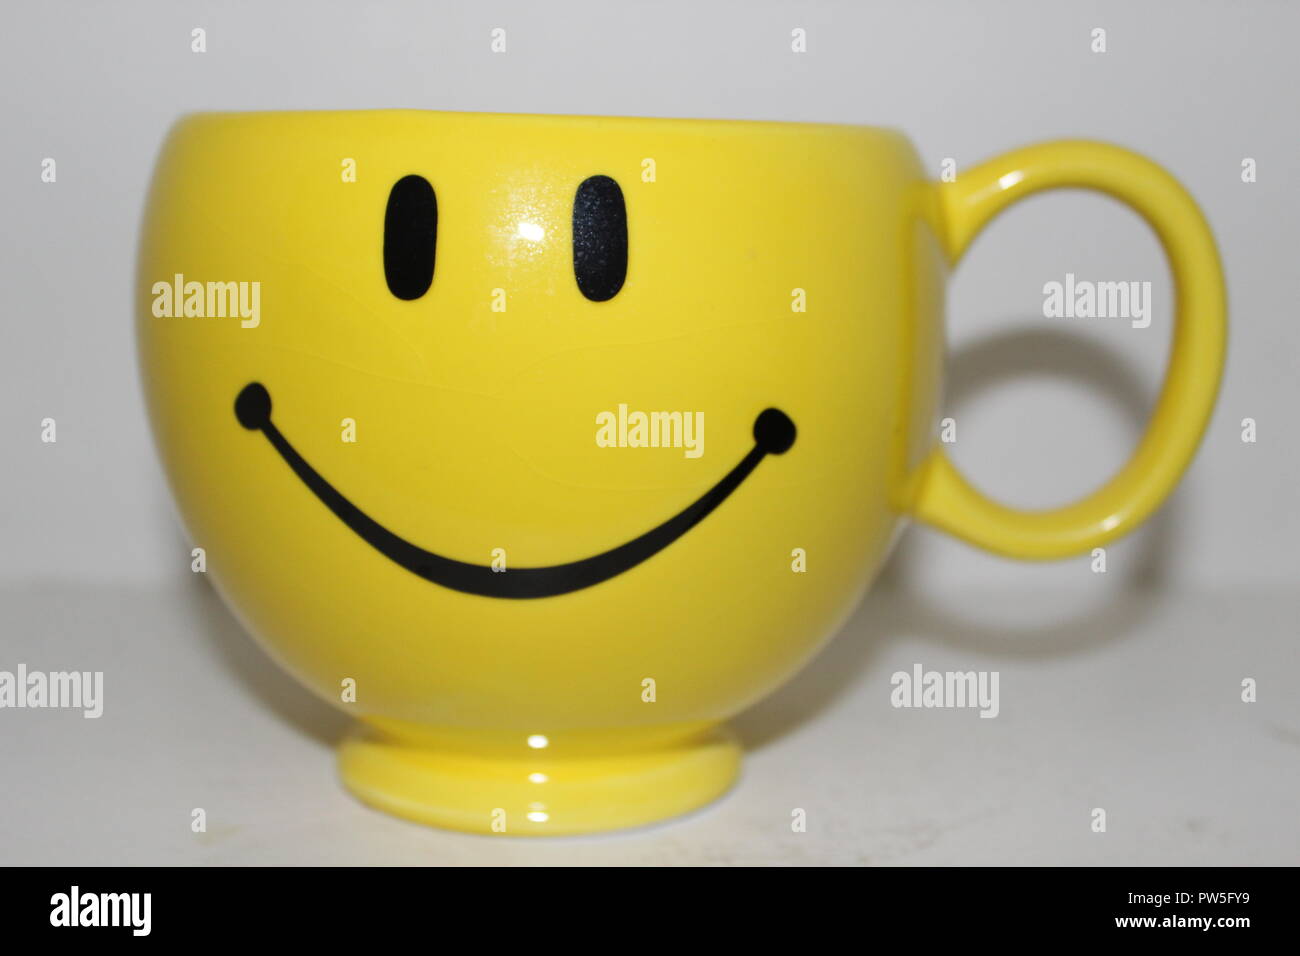 Yellow cup with smiley face design Stock Photo